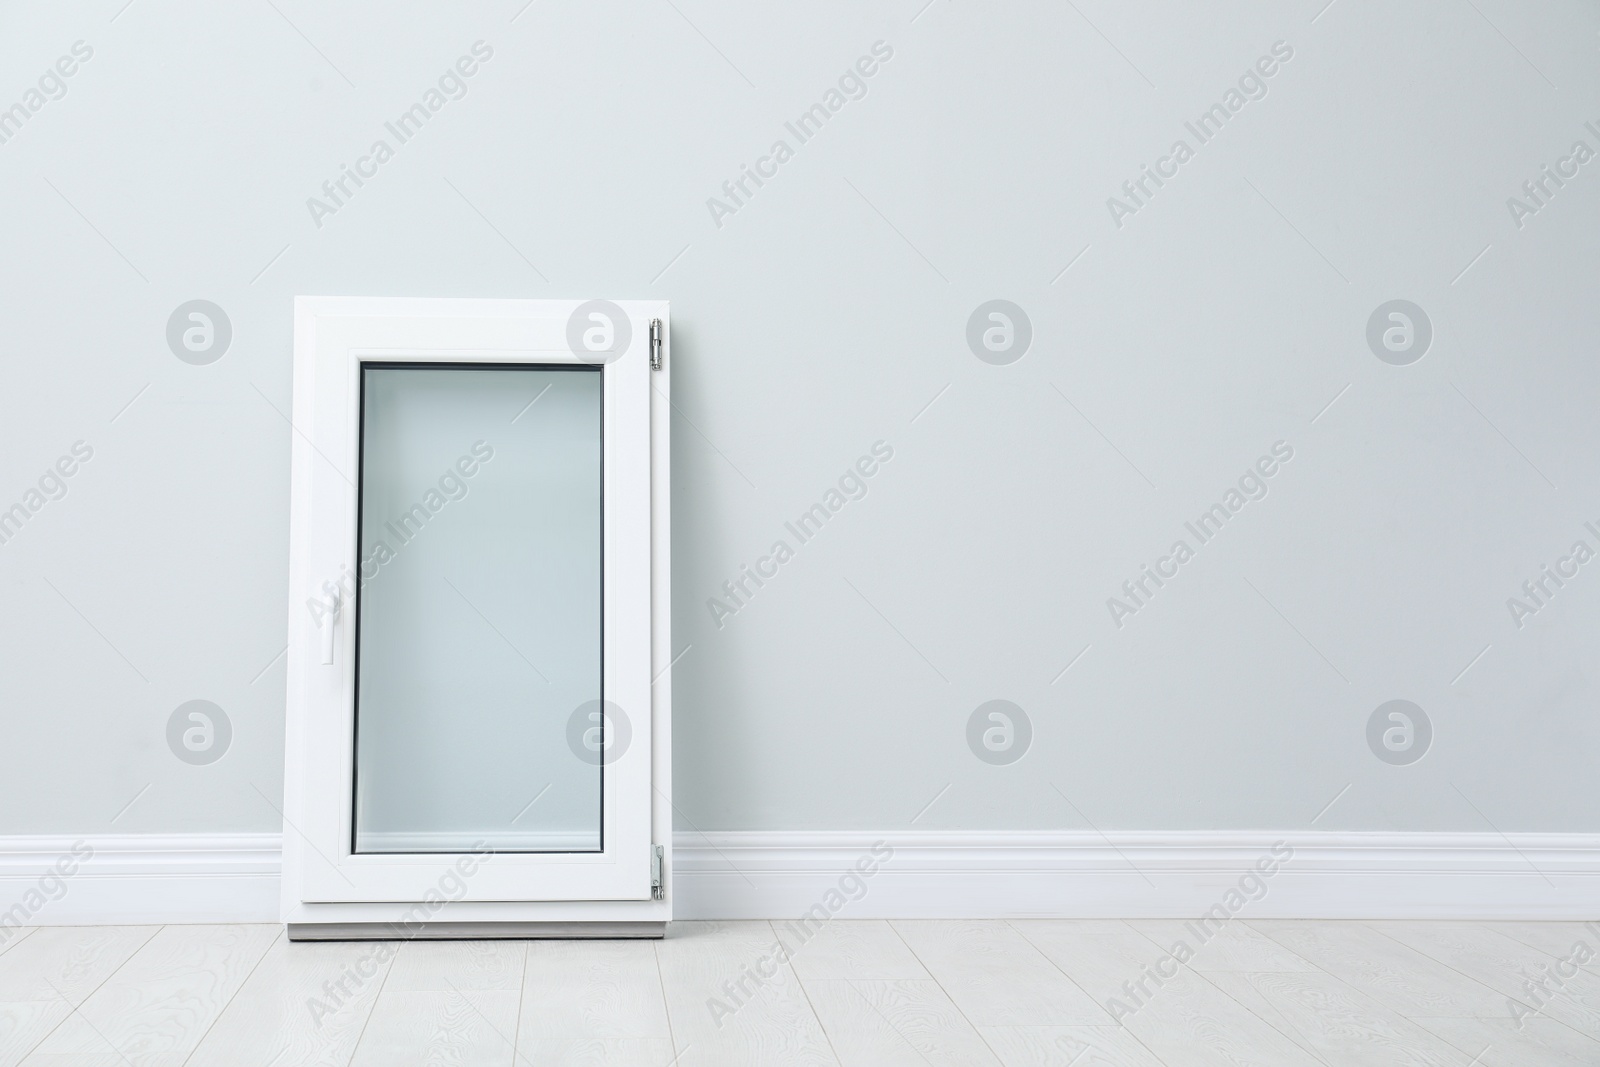 Photo of Modern single casement window near light grey wall indoors, space for text